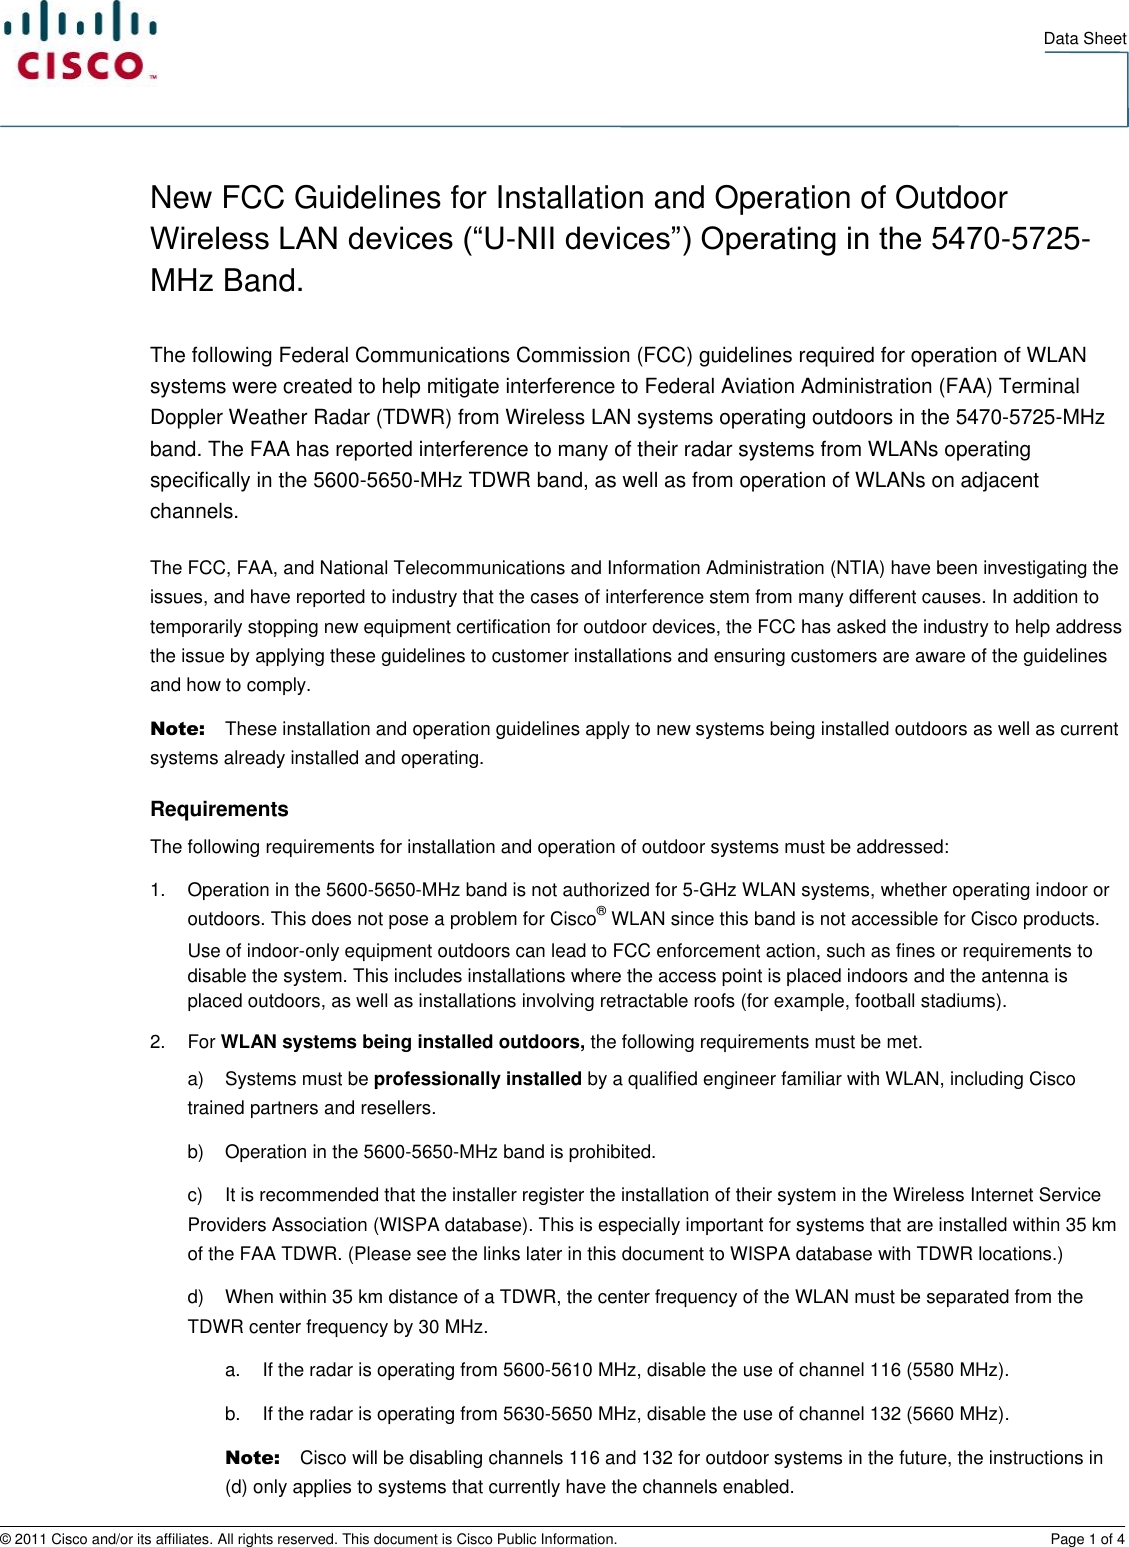   Data Sheet © 2011 Cisco and/or its affiliates. All rights reserved. This document is Cisco Public Information.  Page 1 of 4 New FCC Guidelines for Installation and Operation of Outdoor Wireless LAN devices (“U-NII devices”) Operating in the 5470-5725-MHz Band. The following Federal Communications Commission (FCC) guidelines required for operation of WLAN systems were created to help mitigate interference to Federal Aviation Administration (FAA) Terminal Doppler Weather Radar (TDWR) from Wireless LAN systems operating outdoors in the 5470-5725-MHz band. The FAA has reported interference to many of their radar systems from WLANs operating specifically in the 5600-5650-MHz TDWR band, as well as from operation of WLANs on adjacent channels. The FCC, FAA, and National Telecommunications and Information Administration (NTIA) have been investigating the issues, and have reported to industry that the cases of interference stem from many different causes. In addition to temporarily stopping new equipment certification for outdoor devices, the FCC has asked the industry to help address the issue by applying these guidelines to customer installations and ensuring customers are aware of the guidelines and how to comply. Note:   These installation and operation guidelines apply to new systems being installed outdoors as well as current systems already installed and operating. Requirements The following requirements for installation and operation of outdoor systems must be addressed: 1.  Operation in the 5600-5650-MHz band is not authorized for 5-GHz WLAN systems, whether operating indoor or outdoors. This does not pose a problem for Cisco® WLAN since this band is not accessible for Cisco products. Use of indoor-only equipment outdoors can lead to FCC enforcement action, such as fines or requirements to disable the system. This includes installations where the access point is placed indoors and the antenna is placed outdoors, as well as installations involving retractable roofs (for example, football stadiums). 2.  For WLAN systems being installed outdoors, the following requirements must be met. a)  Systems must be professionally installed by a qualified engineer familiar with WLAN, including Cisco trained partners and resellers. b)  Operation in the 5600-5650-MHz band is prohibited. c)  It is recommended that the installer register the installation of their system in the Wireless Internet Service Providers Association (WISPA database). This is especially important for systems that are installed within 35 km of the FAA TDWR. (Please see the links later in this document to WISPA database with TDWR locations.) d)  When within 35 km distance of a TDWR, the center frequency of the WLAN must be separated from the TDWR center frequency by 30 MHz. a.  If the radar is operating from 5600-5610 MHz, disable the use of channel 116 (5580 MHz). b.  If the radar is operating from 5630-5650 MHz, disable the use of channel 132 (5660 MHz). Note:   Cisco will be disabling channels 116 and 132 for outdoor systems in the future, the instructions in (d) only applies to systems that currently have the channels enabled. 